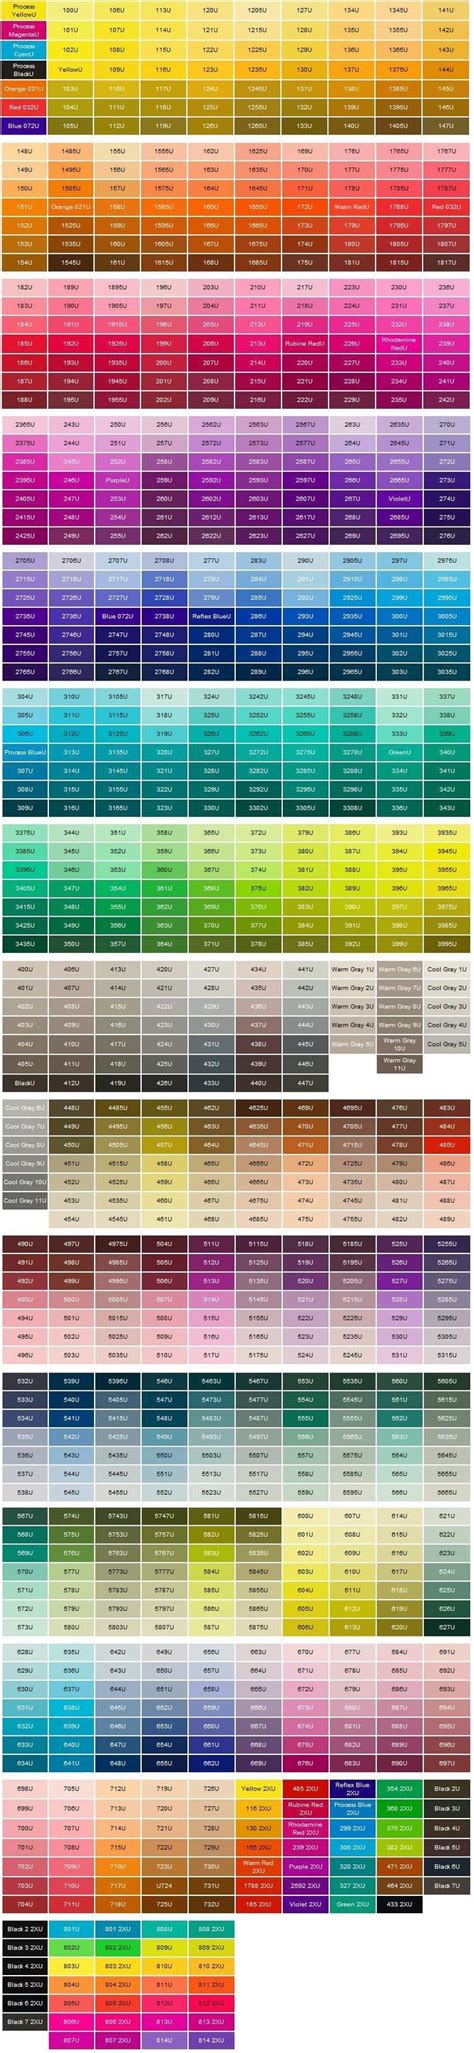 6129 Best Images About All The Colors Of The Rainbow On Pinterest